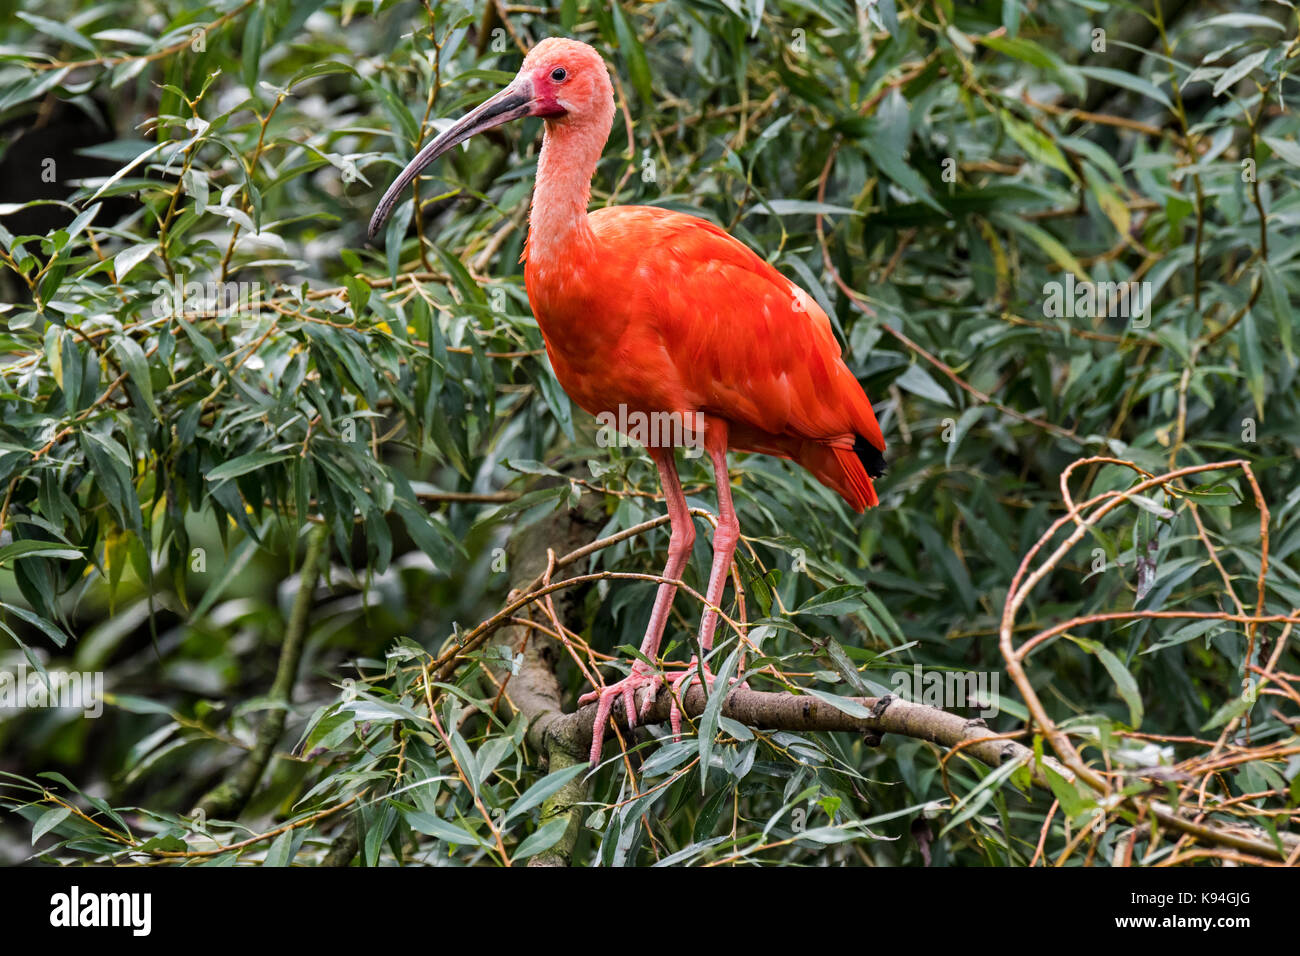 Scarlet ibis (Eudocimus ruber) perched in tree, native to tropical South America and islands of the Caribbean Stock Photo